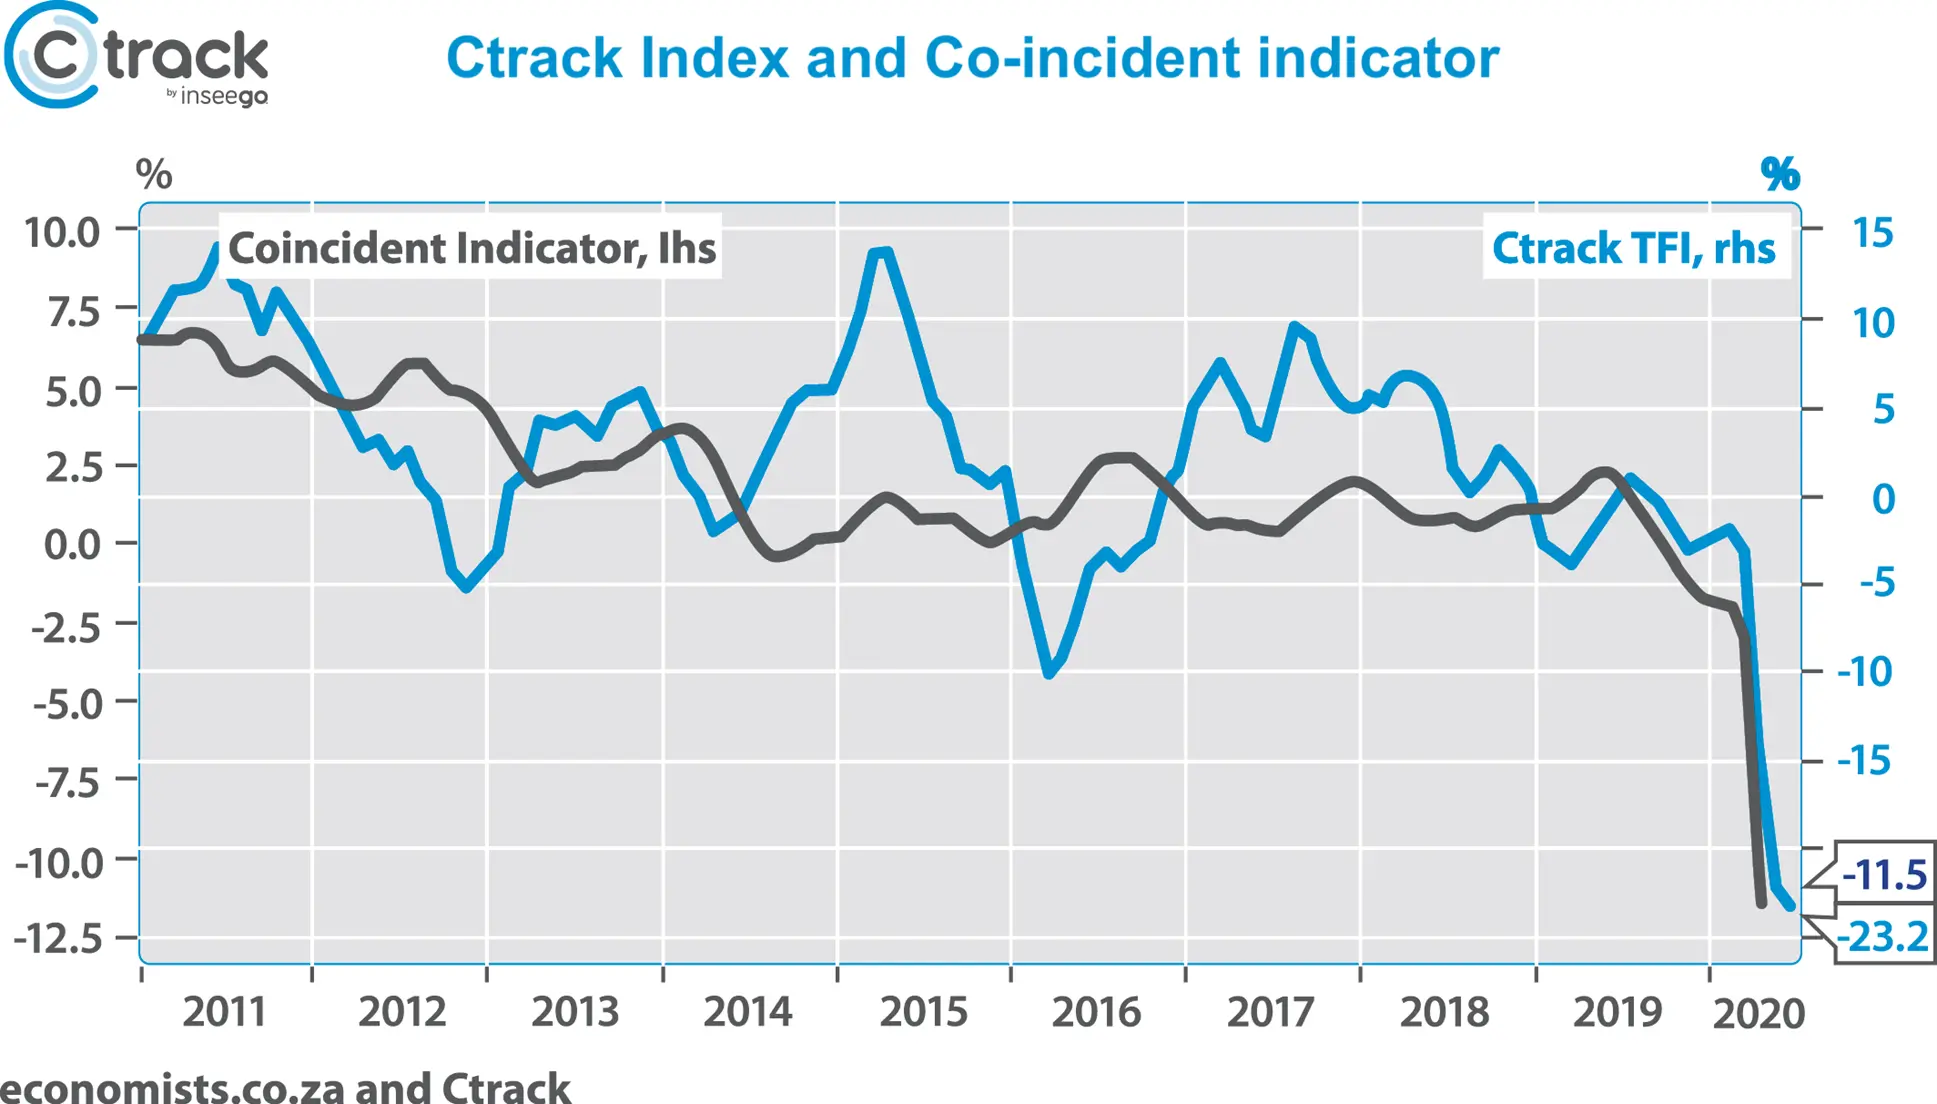 Ctrack-Index-and-Co-incident-indicator-July-2020.